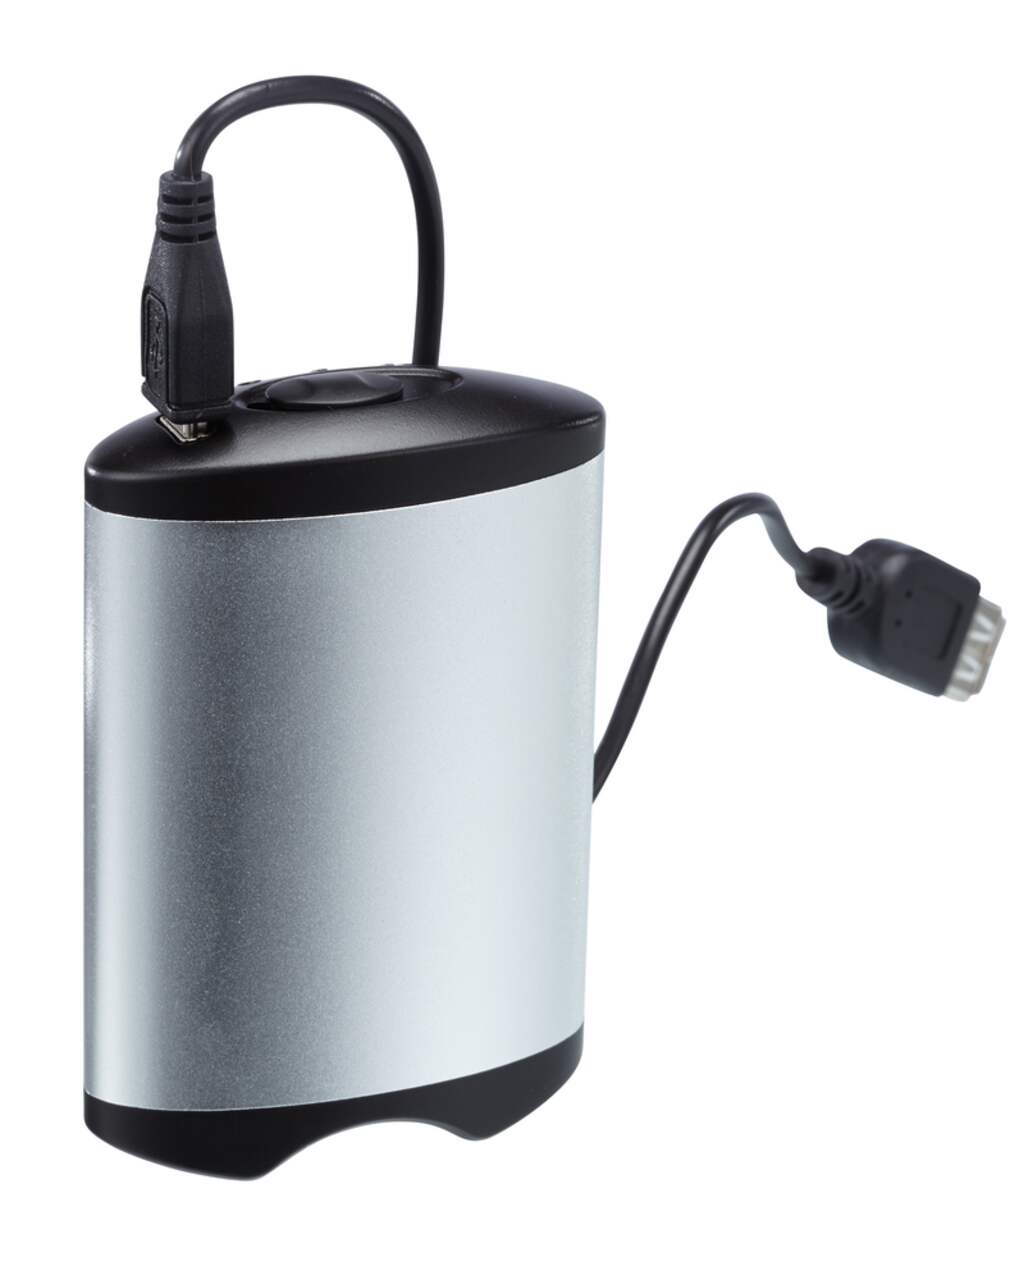 Chargeur portable chauffe-mains